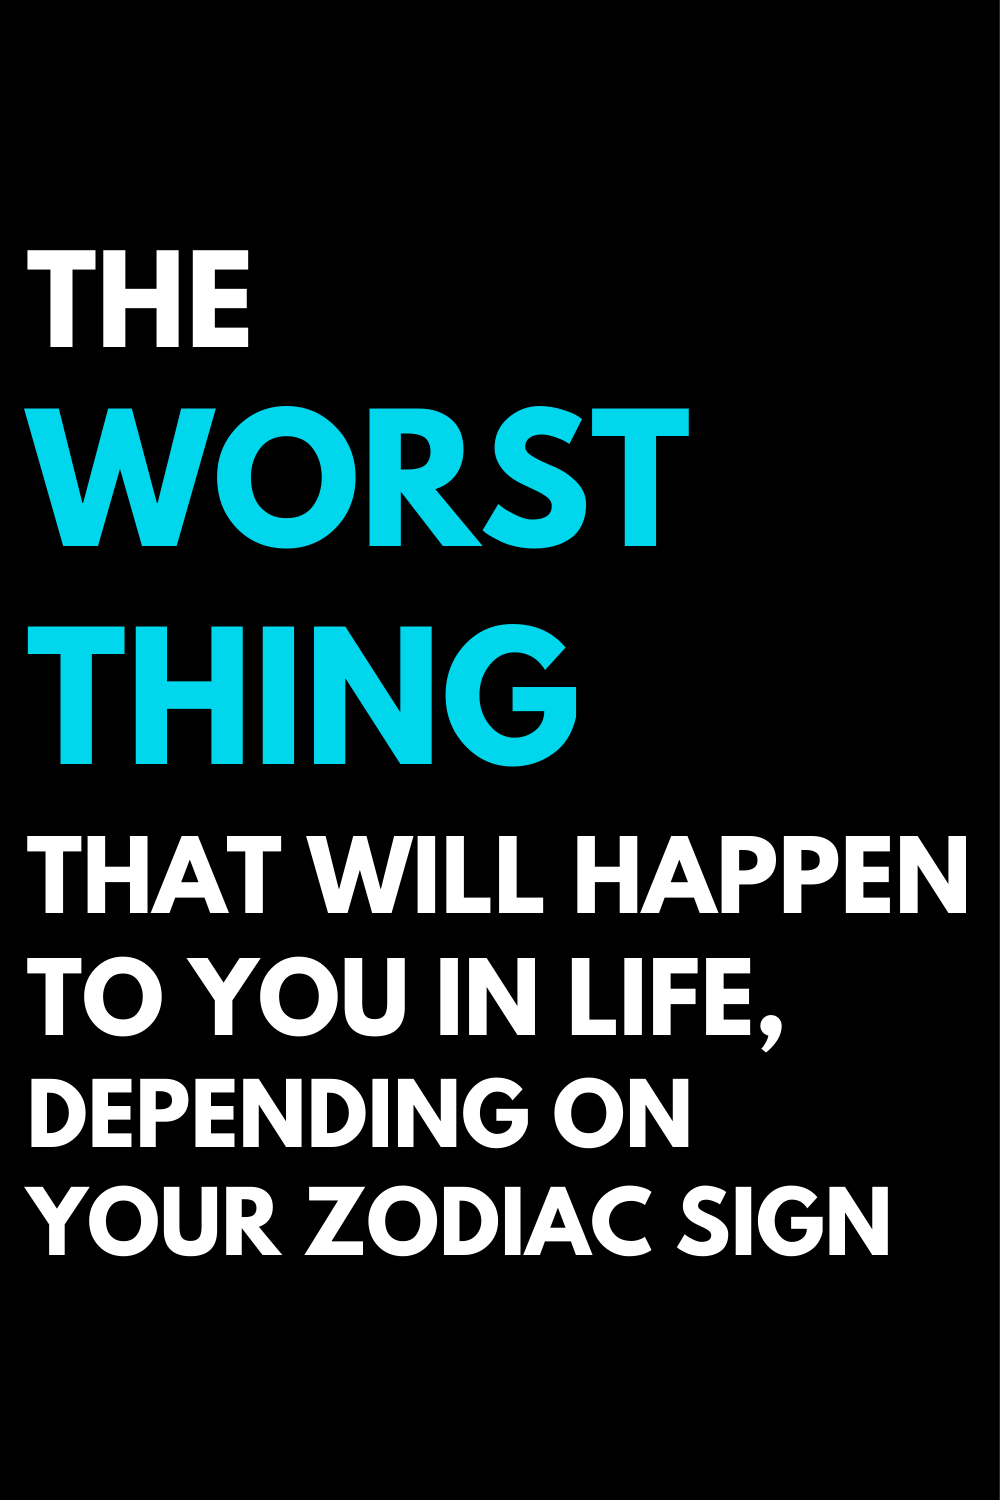 The worst thing that will happen to you in life, depending on your zodiac sign